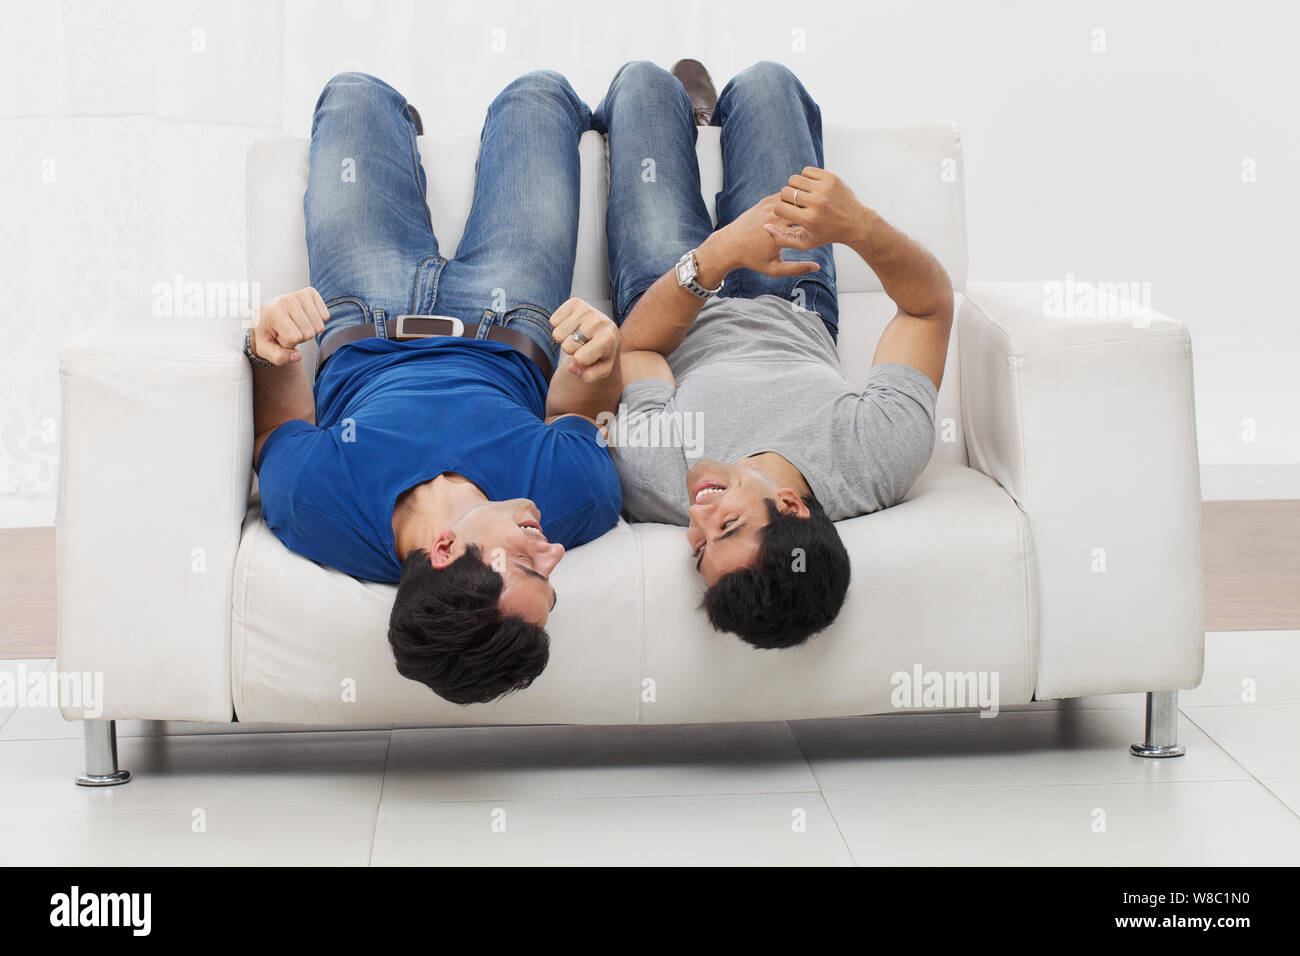 Two friends lying upside down on sofa Stock Photo